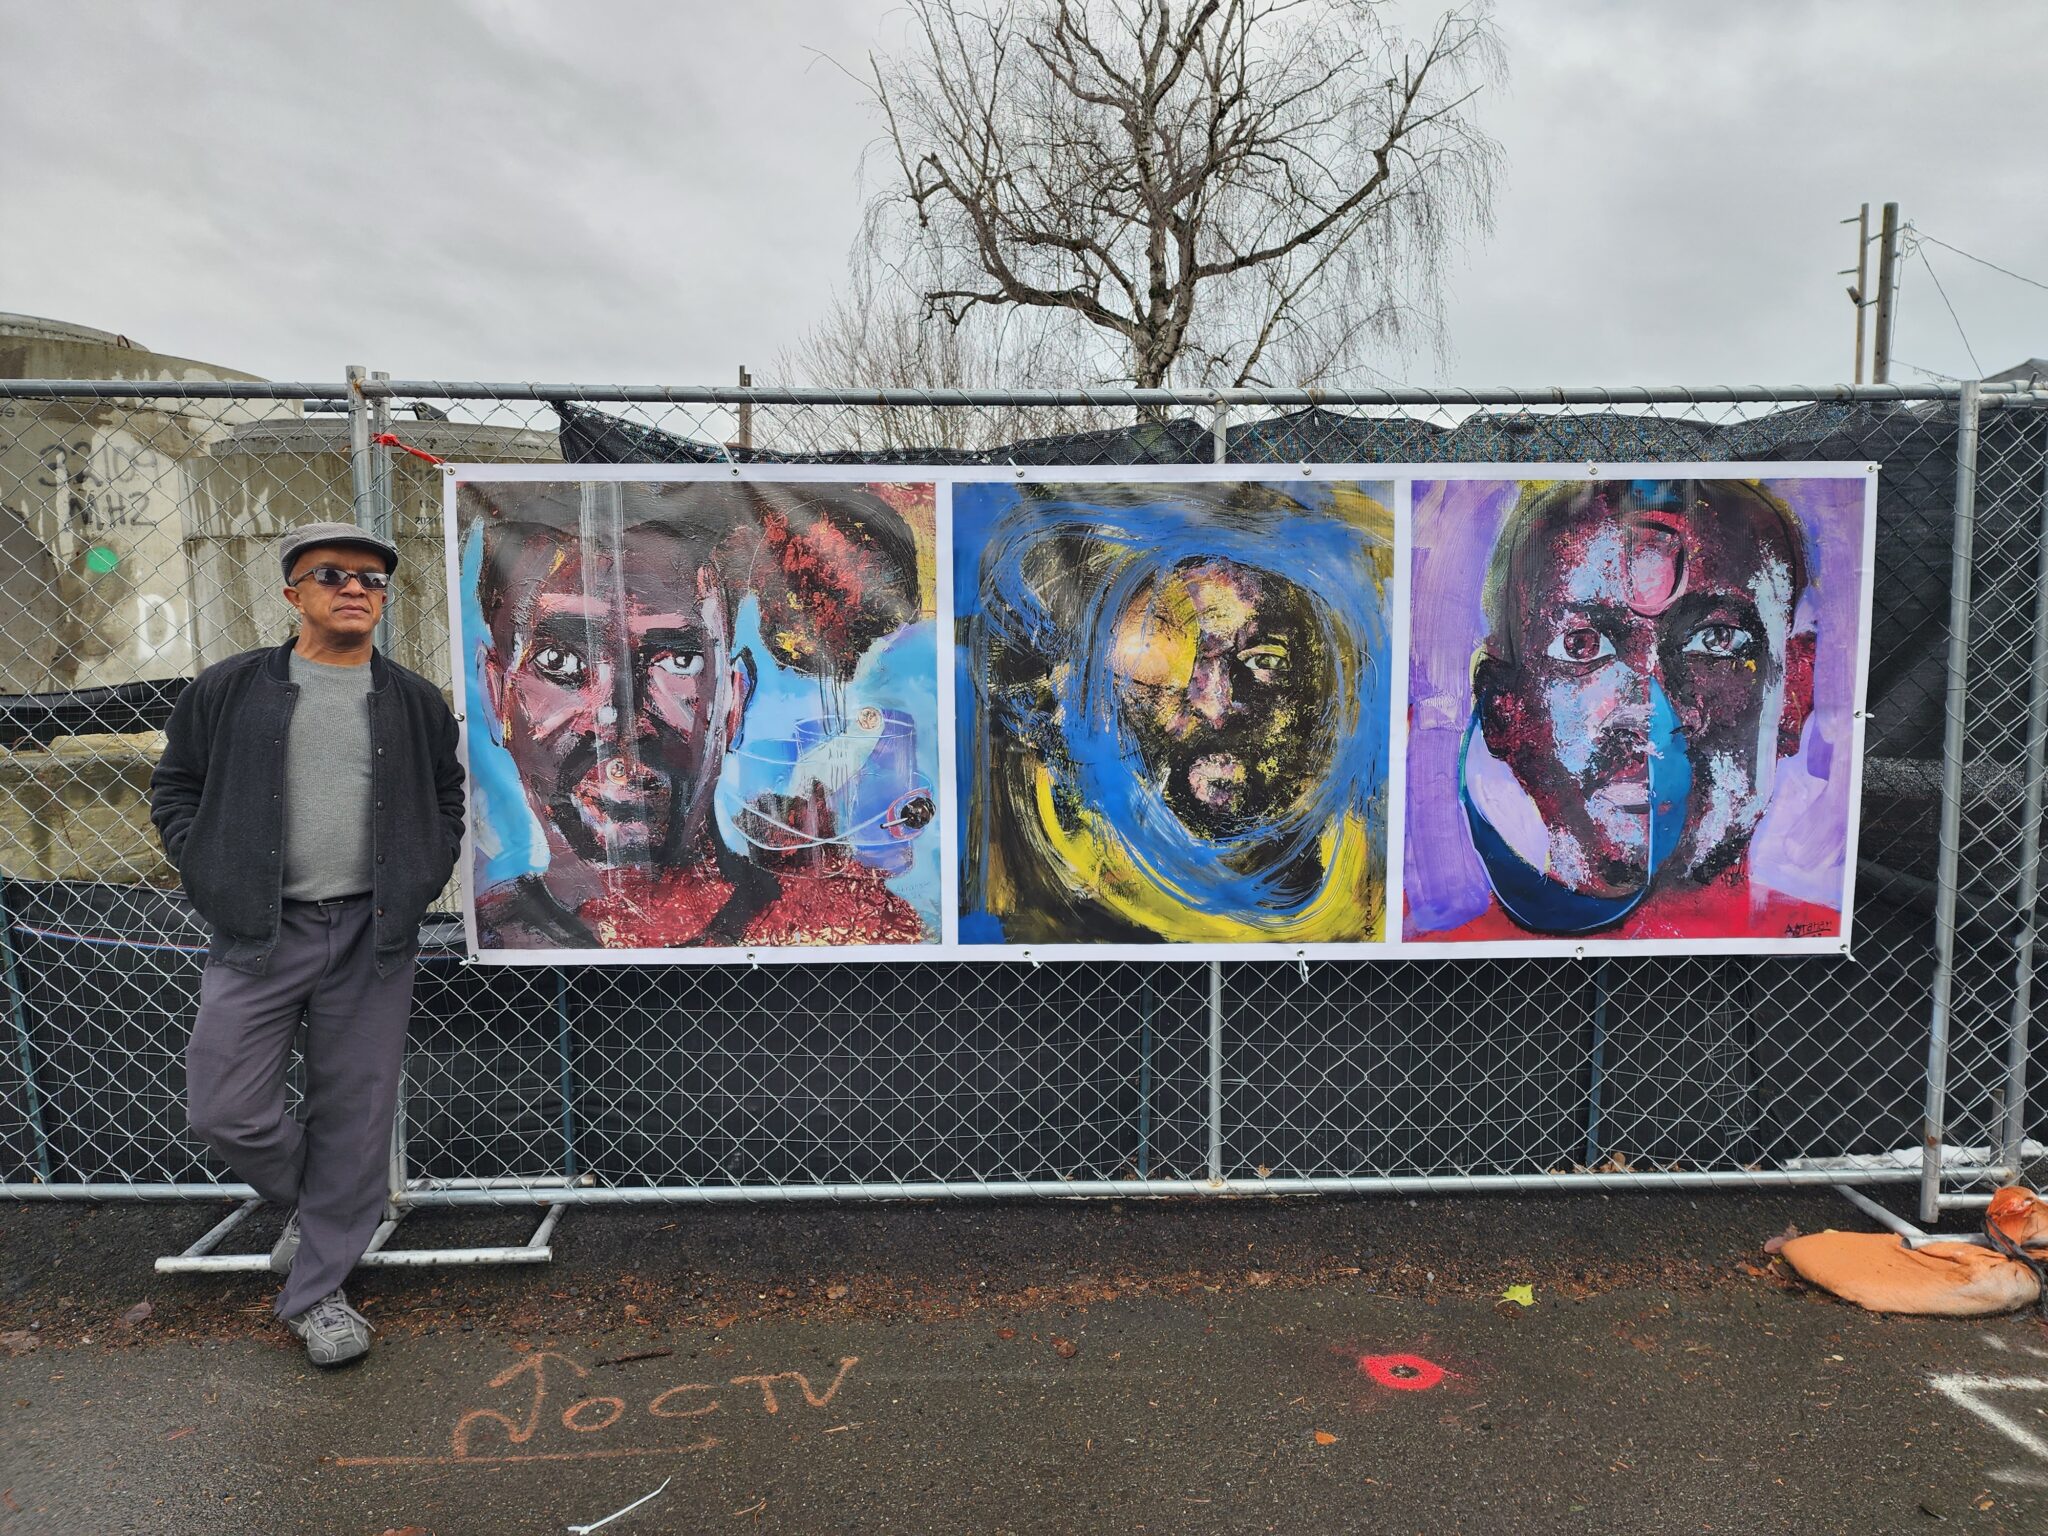 Man stands outside next to horizontal painting of three portraits hung on chain link fence